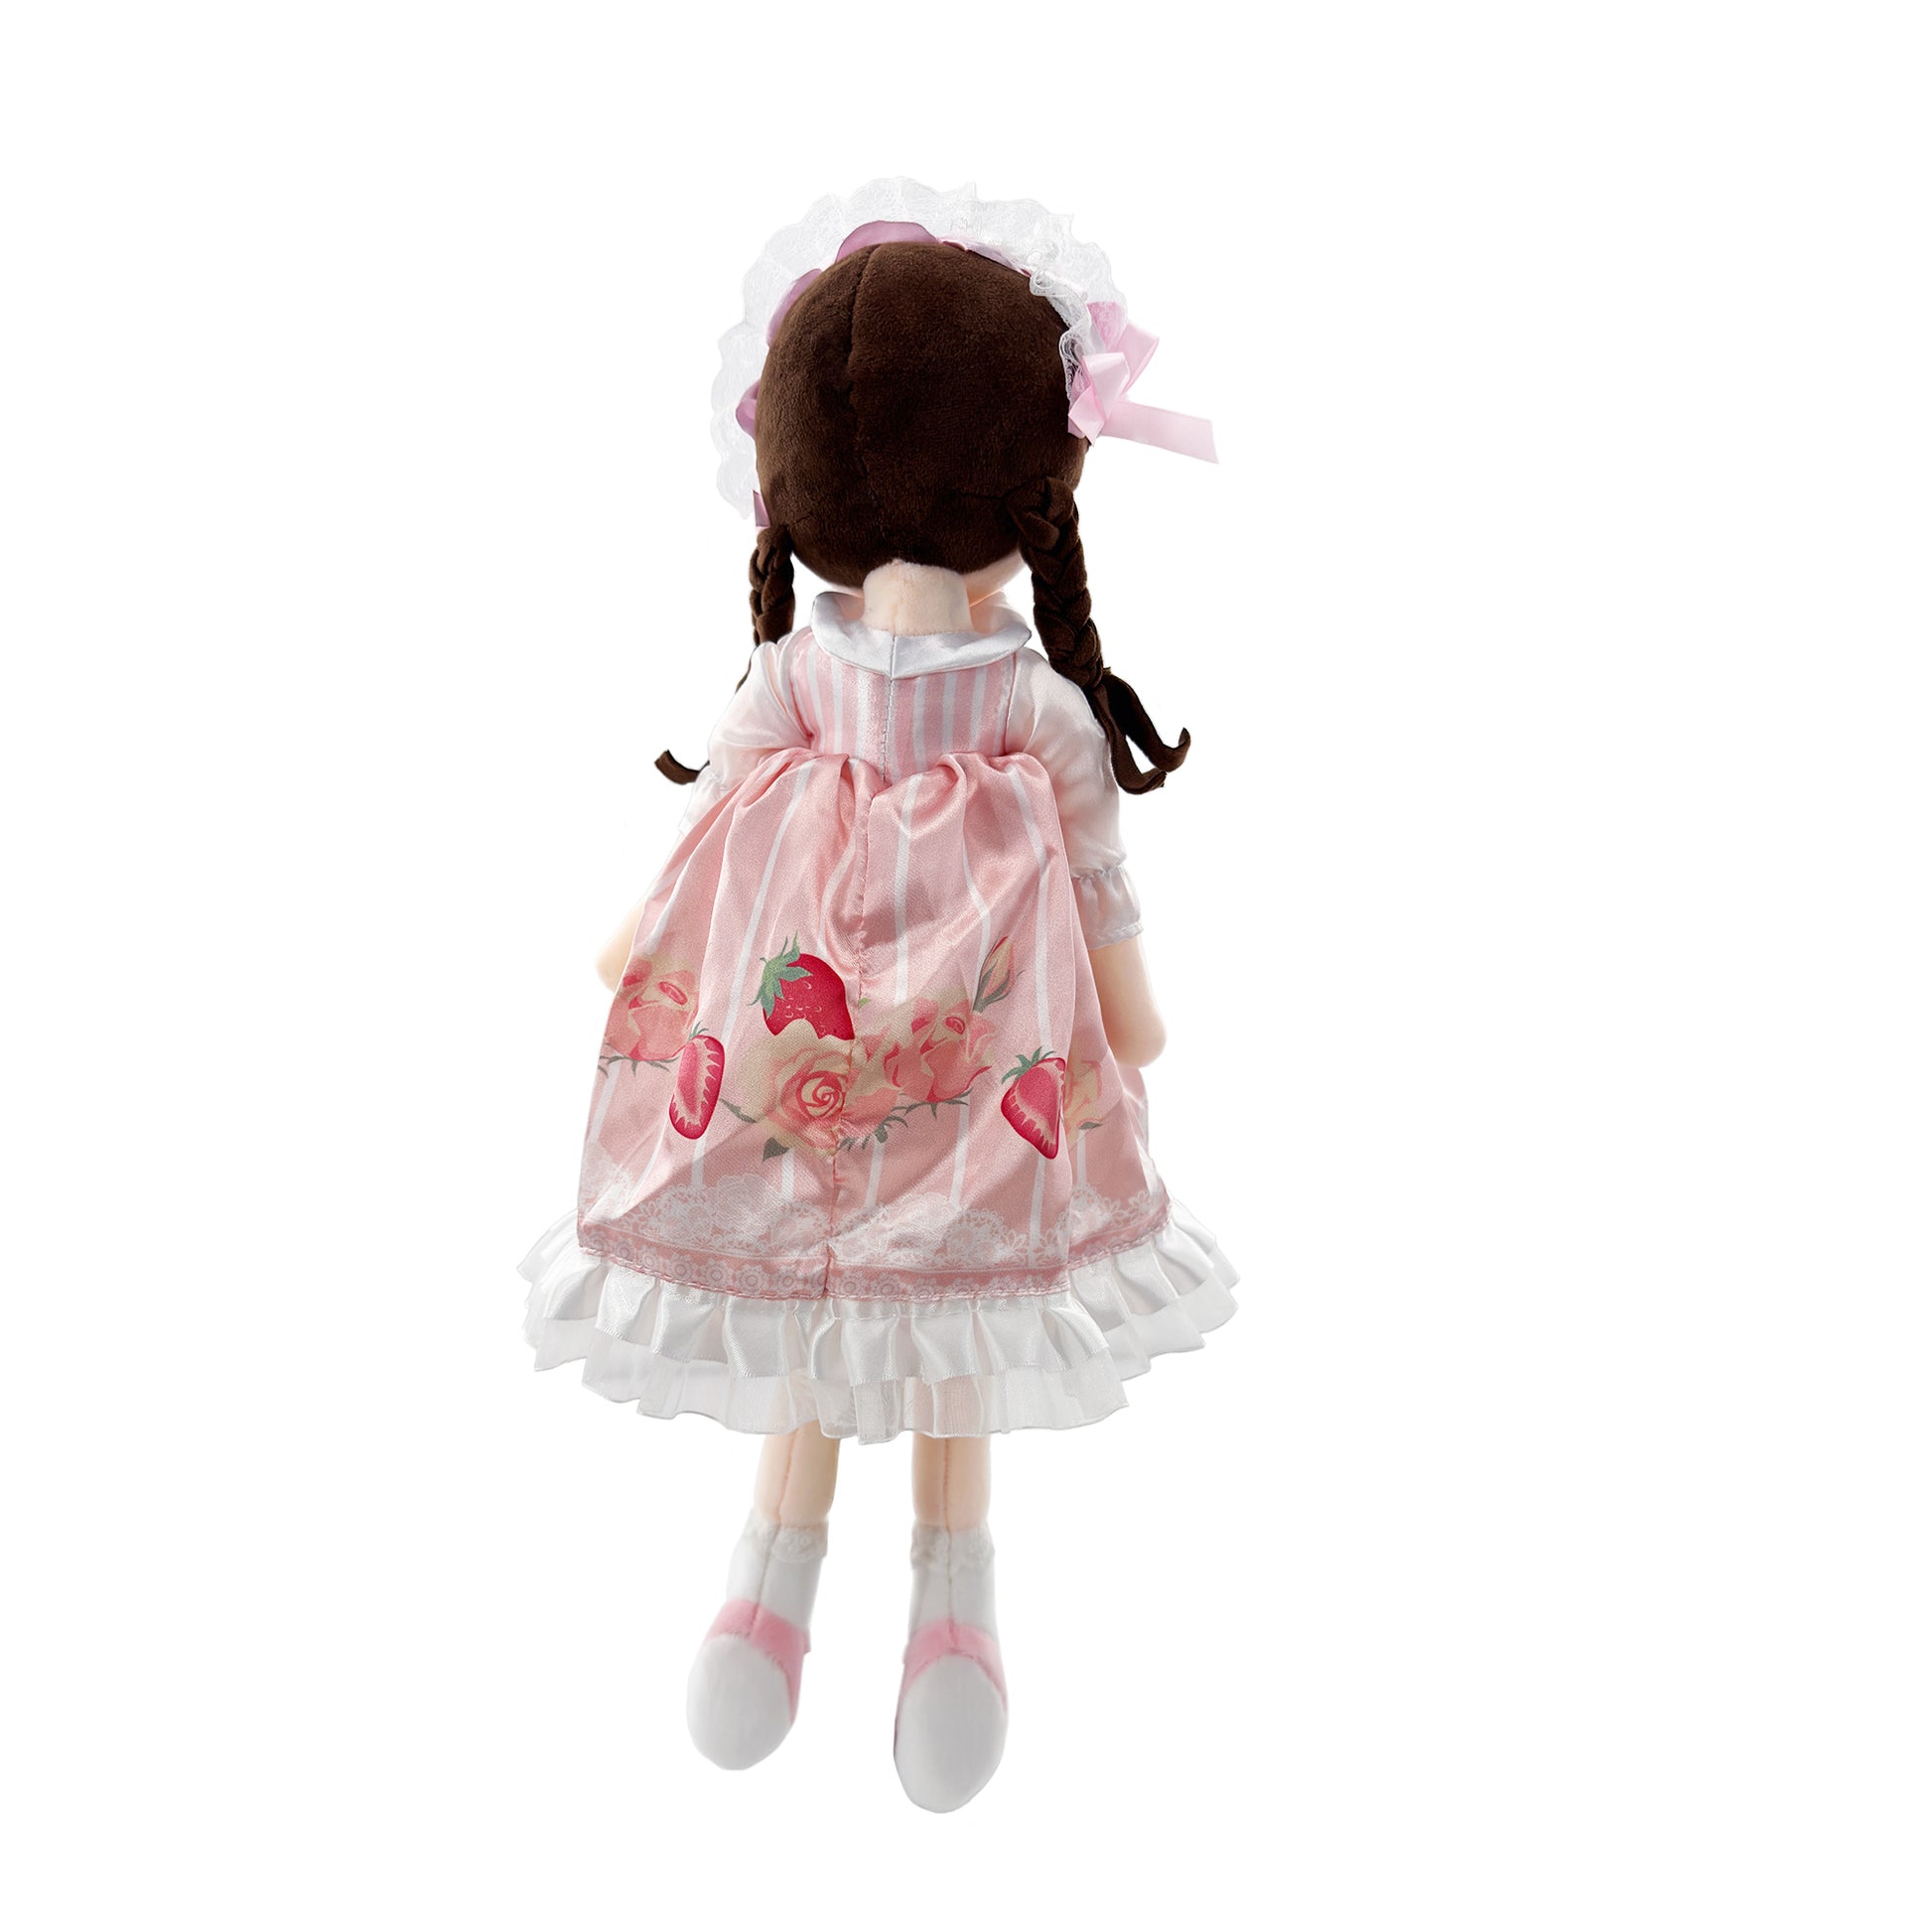 girl in pink dress flower patterns back view PlushThis